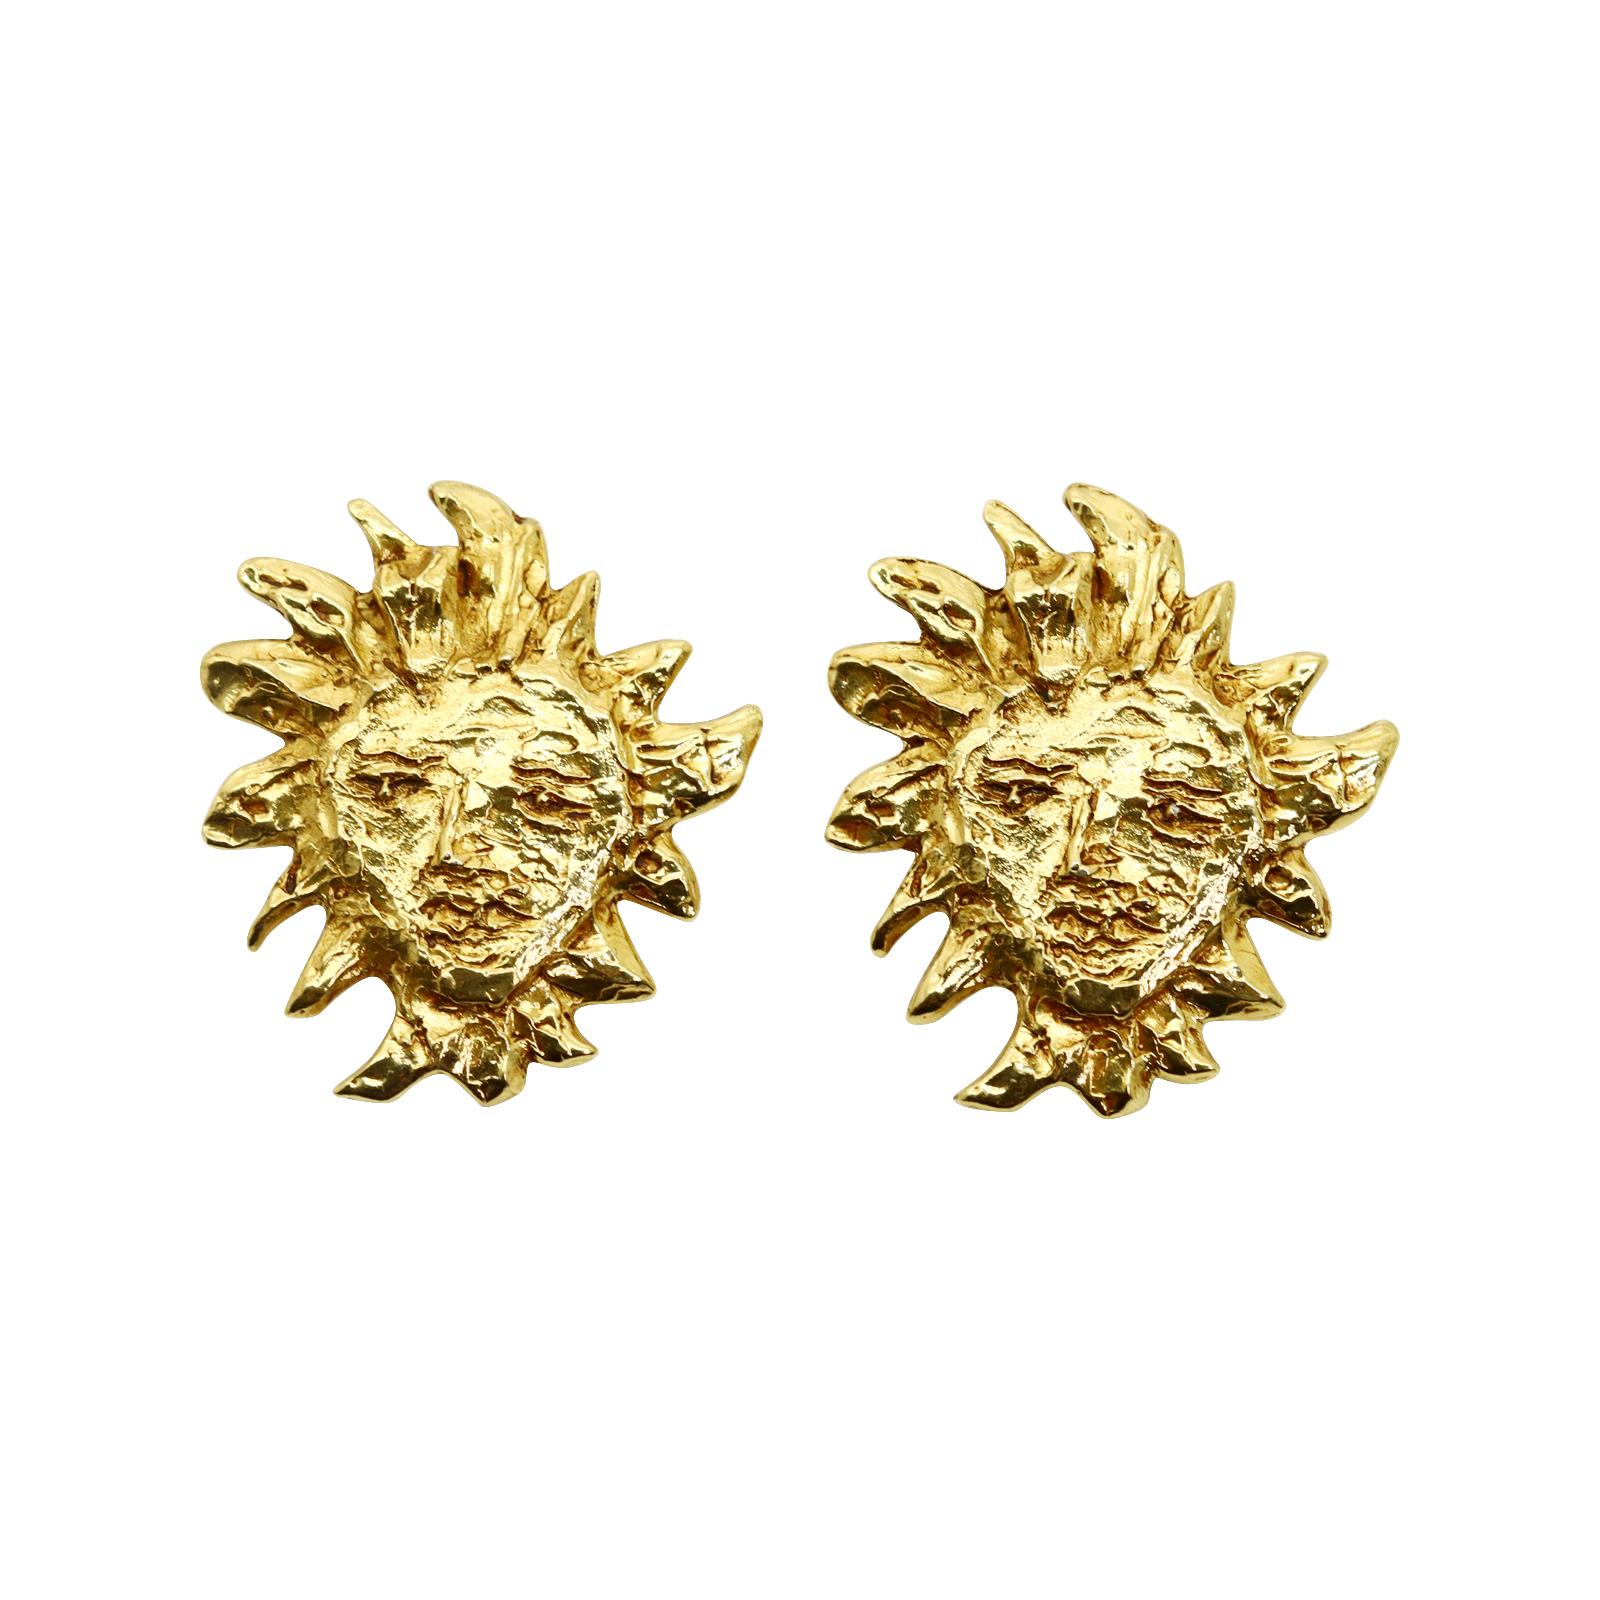 Vintage Yves Saint Laurent YSL Gold Sun Earrings Circa 1980s In Good Condition For Sale In New York, NY